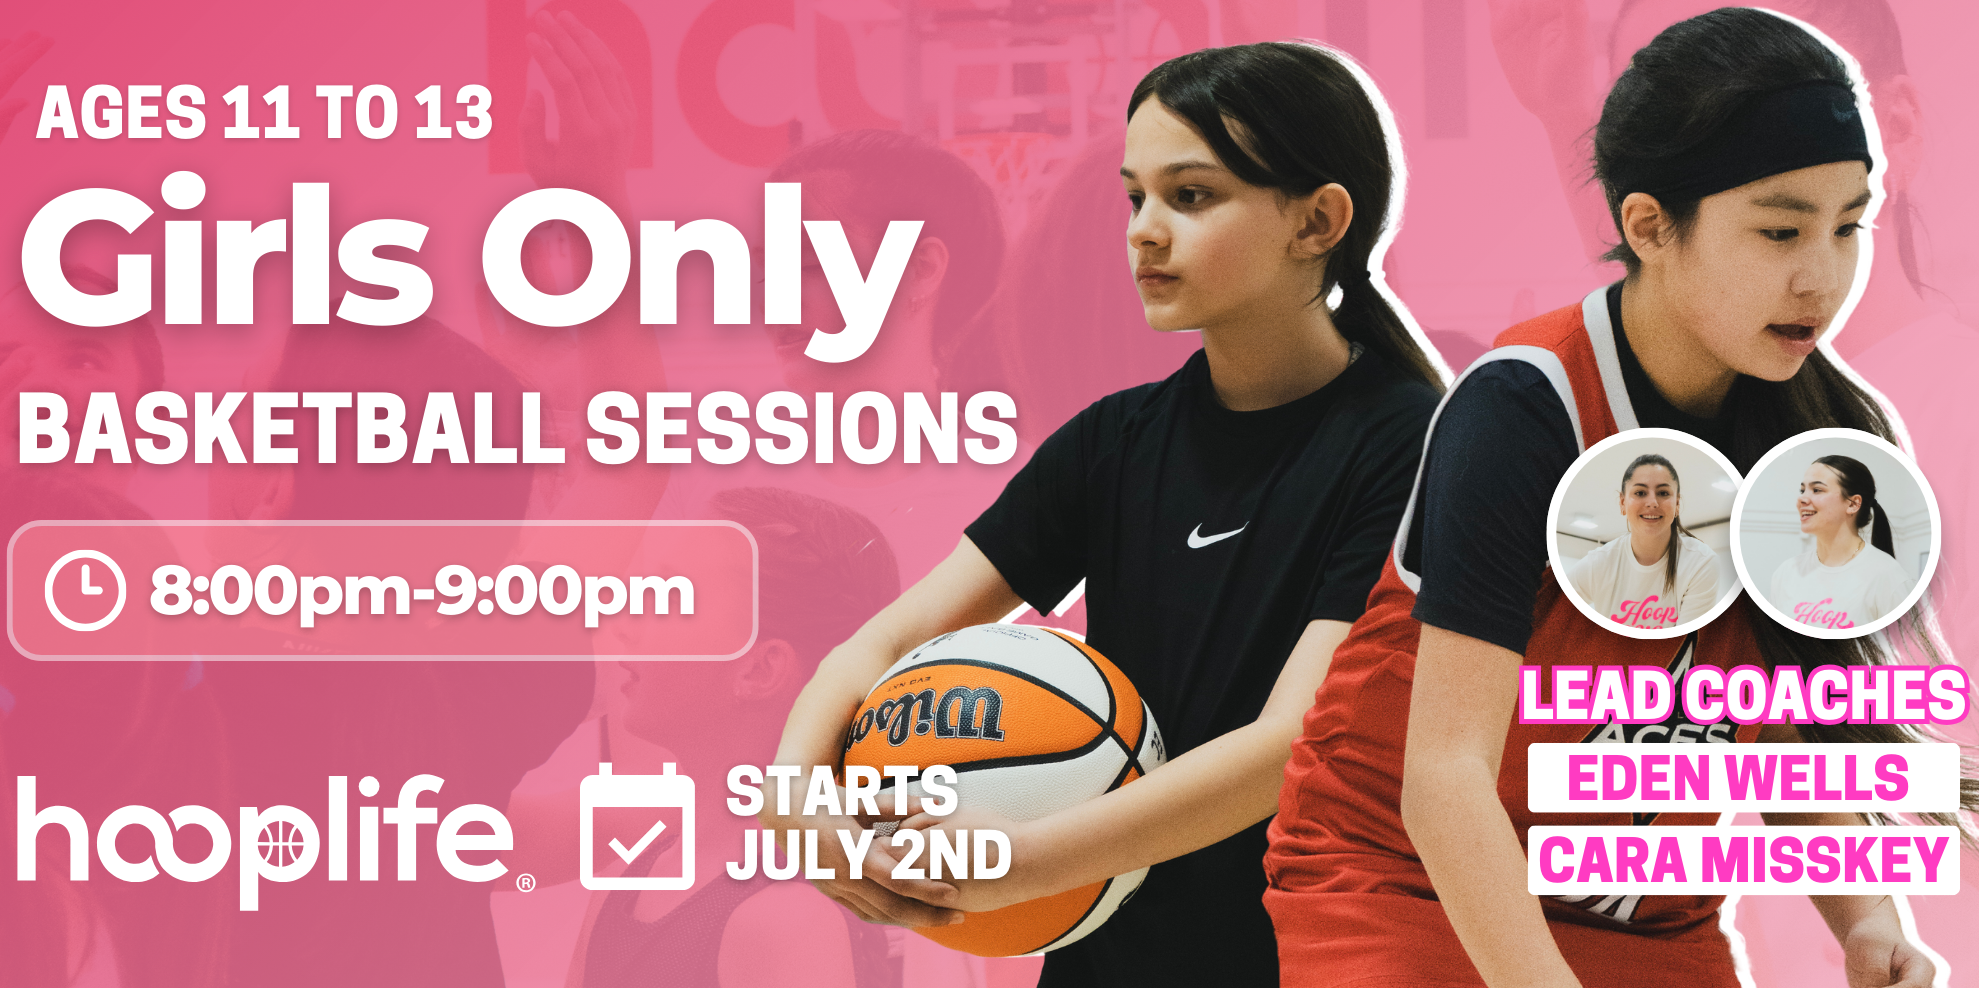 Ages 11-13 Girls Only Basketball Session 